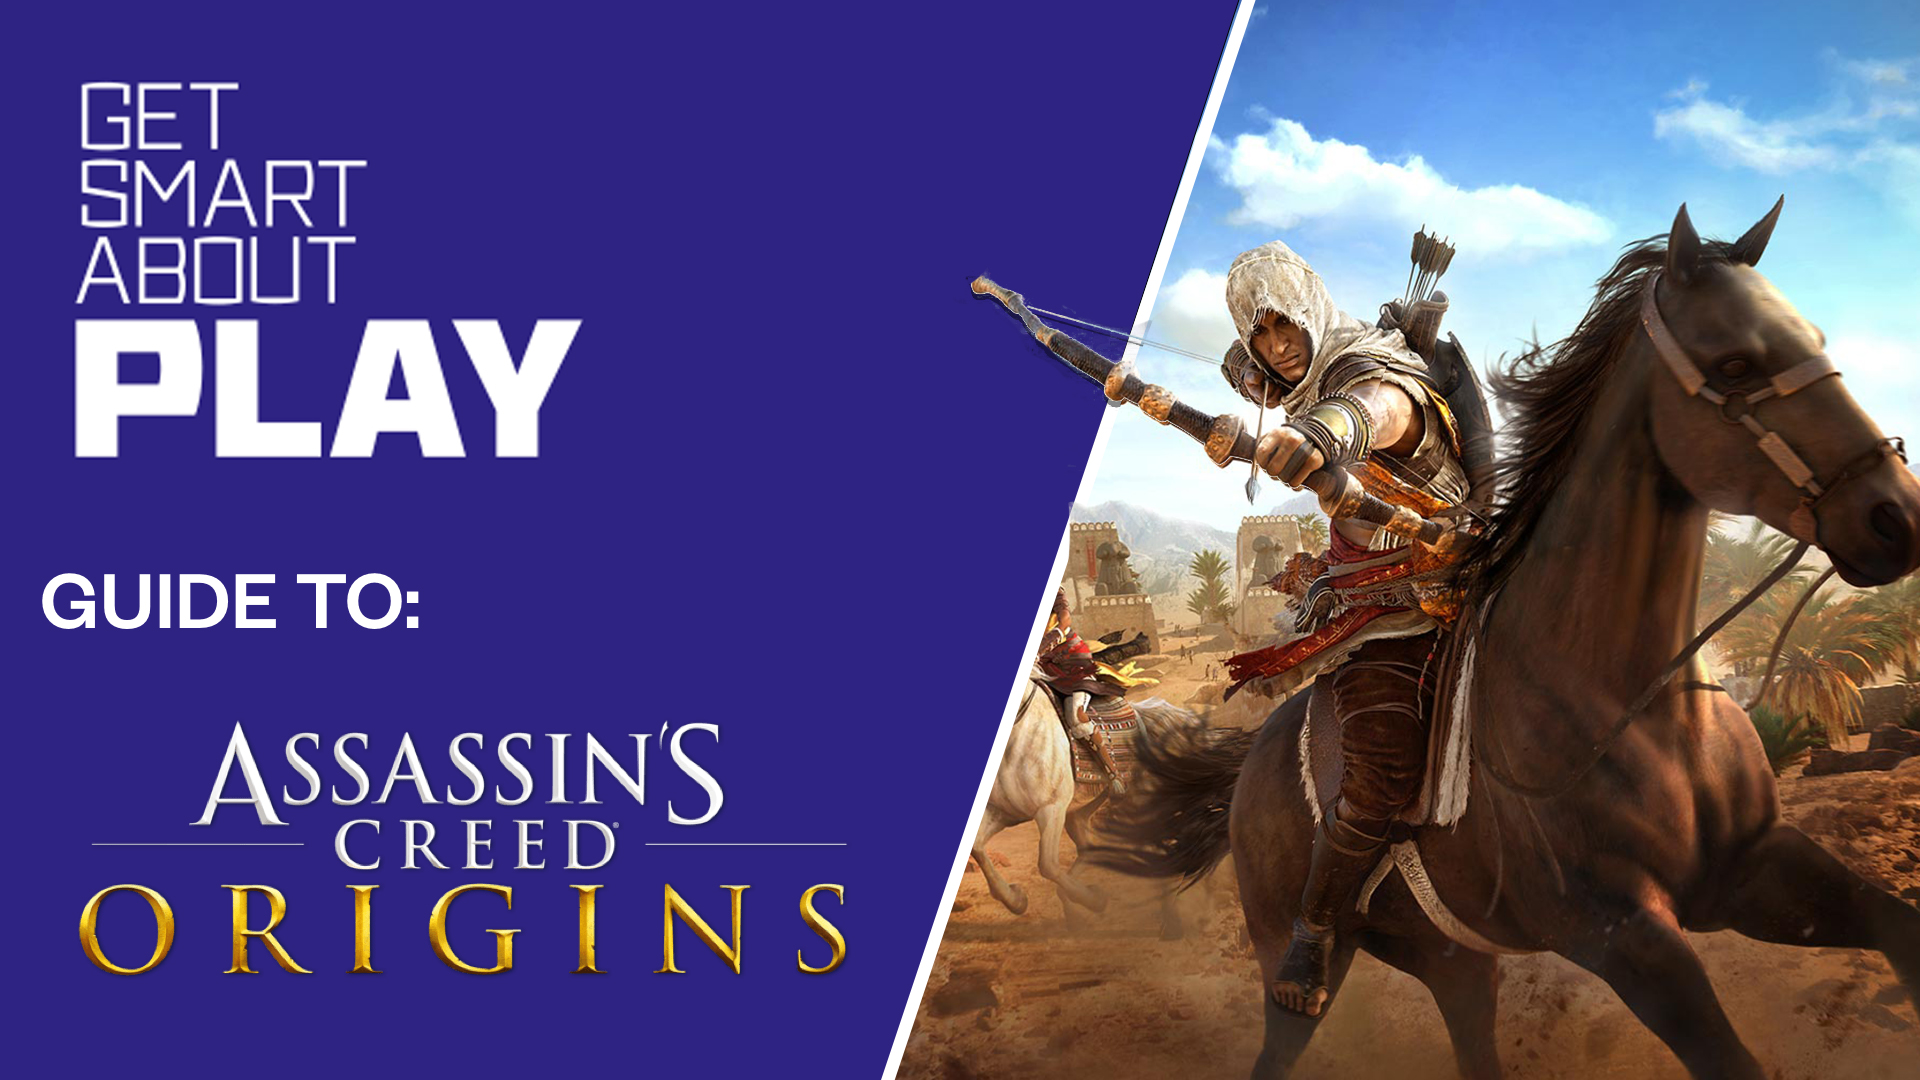 Featured Image for Parents' Guide: Assassin's Creed Origins (PEGI 18+) 